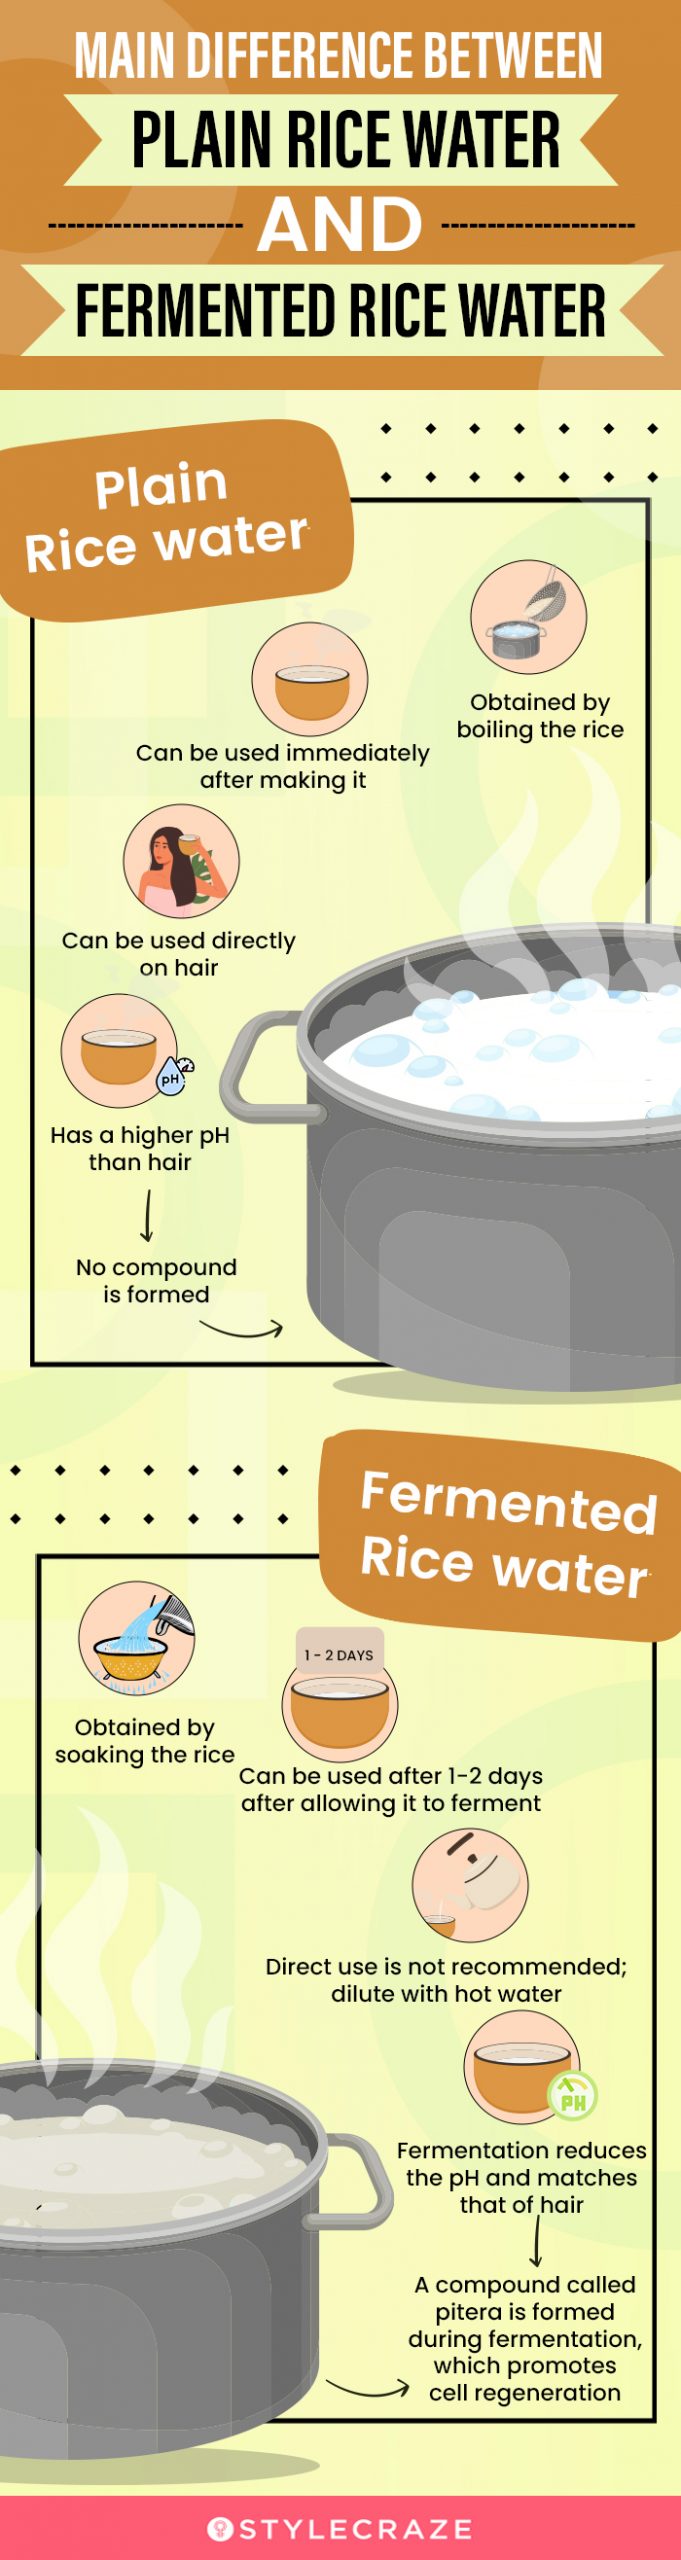 main difference between plain rice water and fermented rice water [infographic]